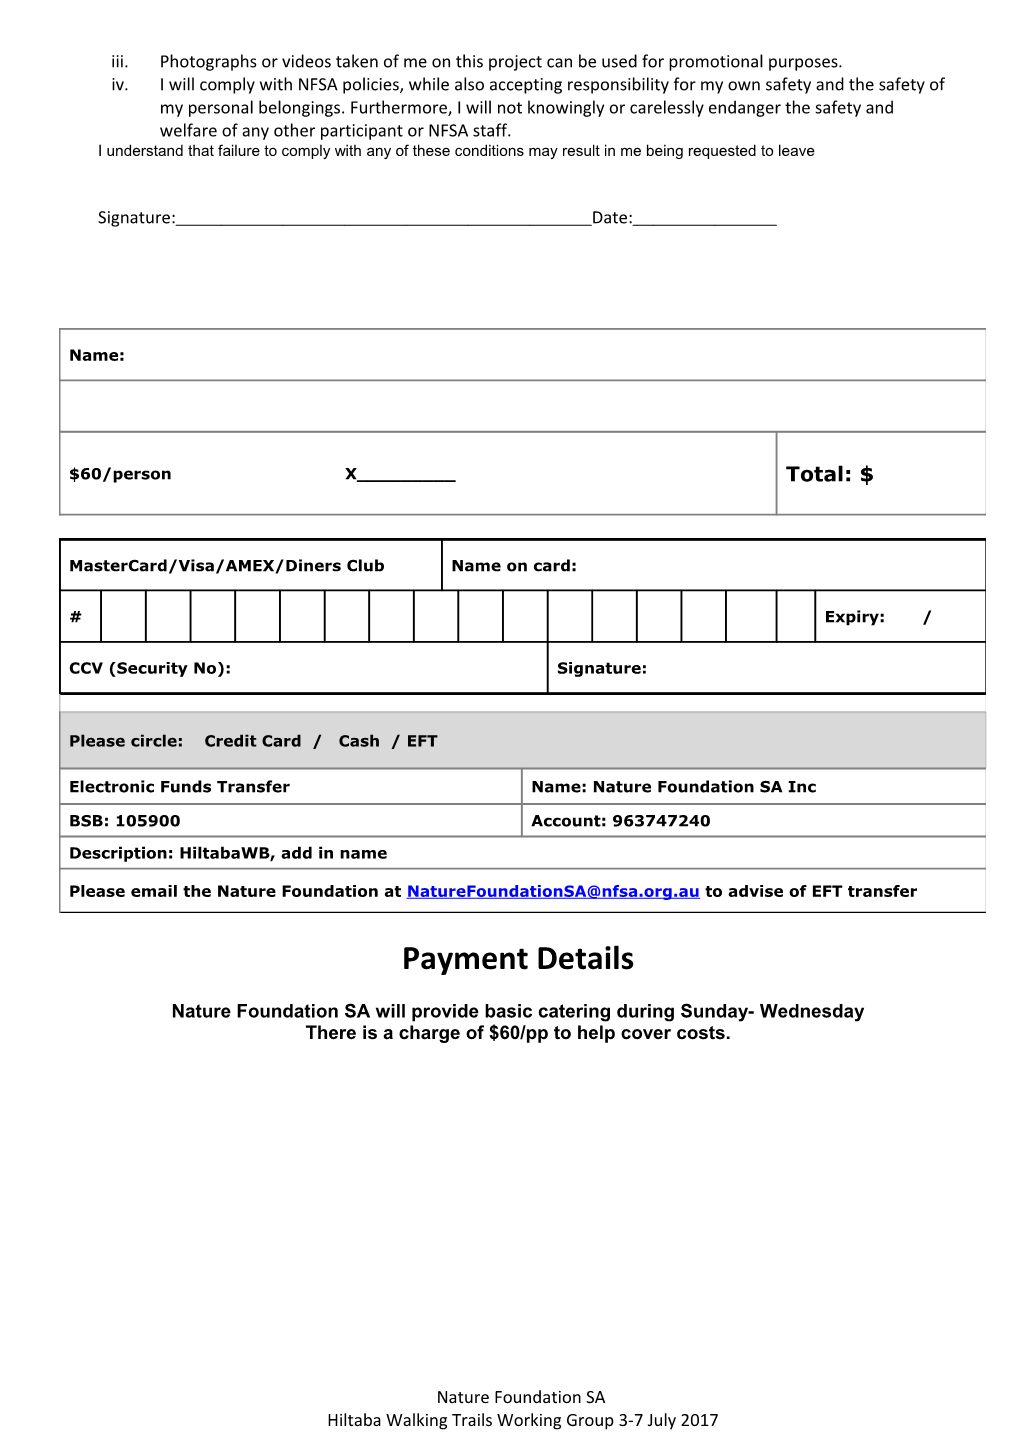 Please Complete This Form for Each Participant and Return by 1 June 2017